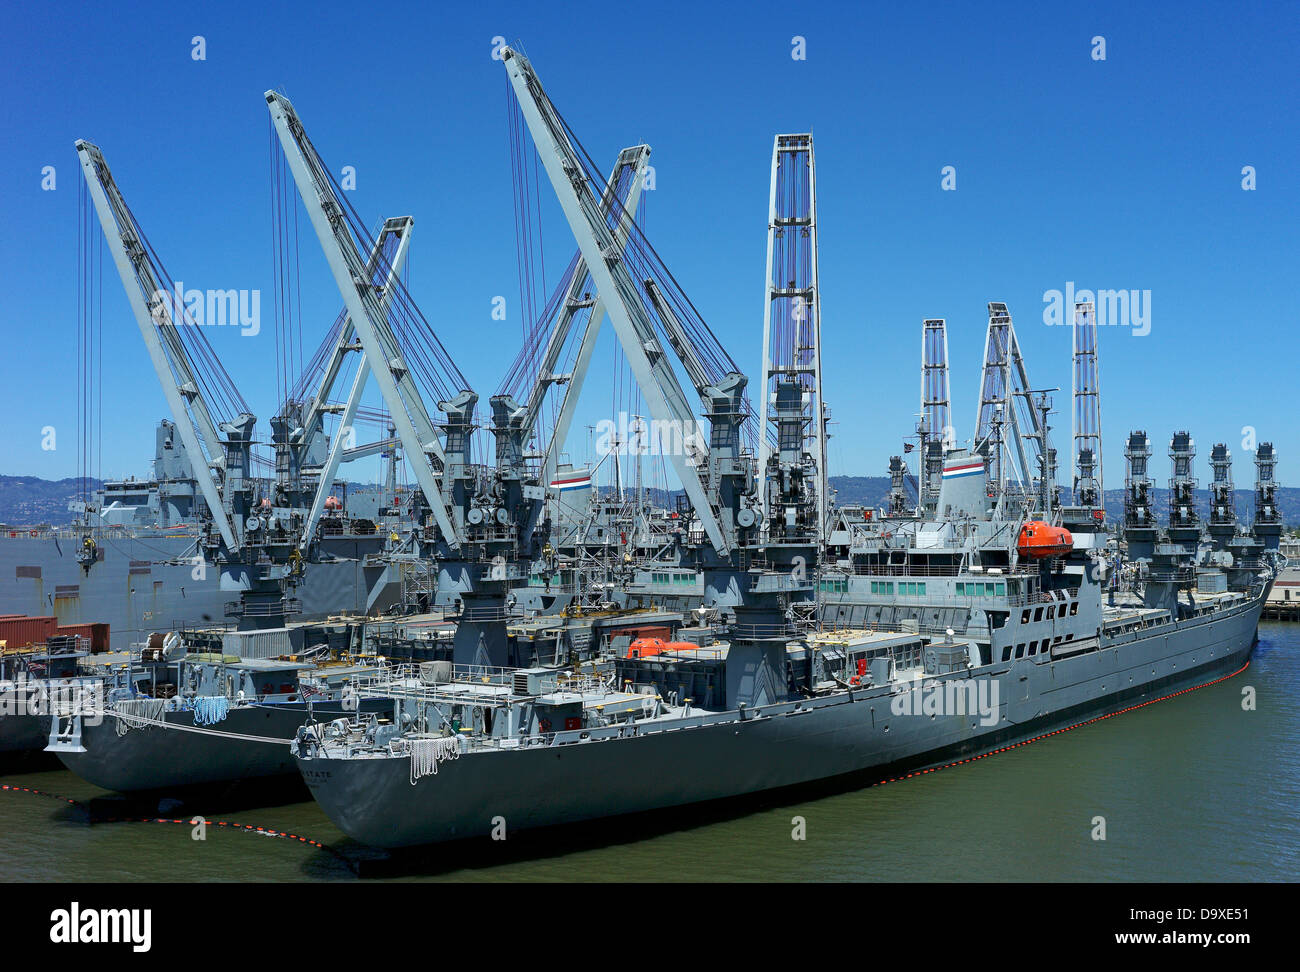 Ready Reserve ships are seen docked in Alameda awaiting deployment Stock Photo